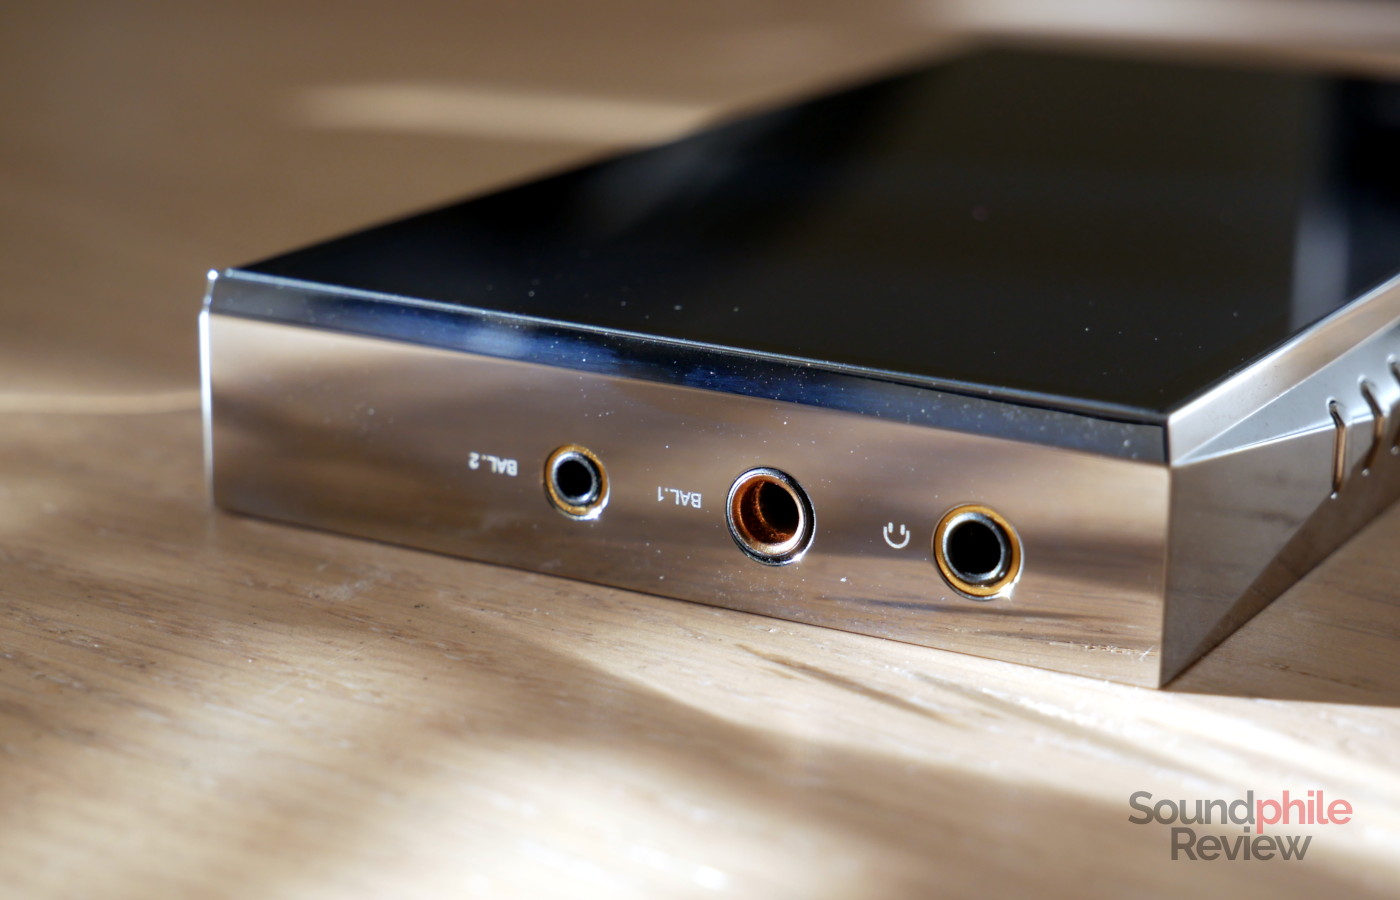 The top of the Astell Kern SP3000 hosts the output jack sockets